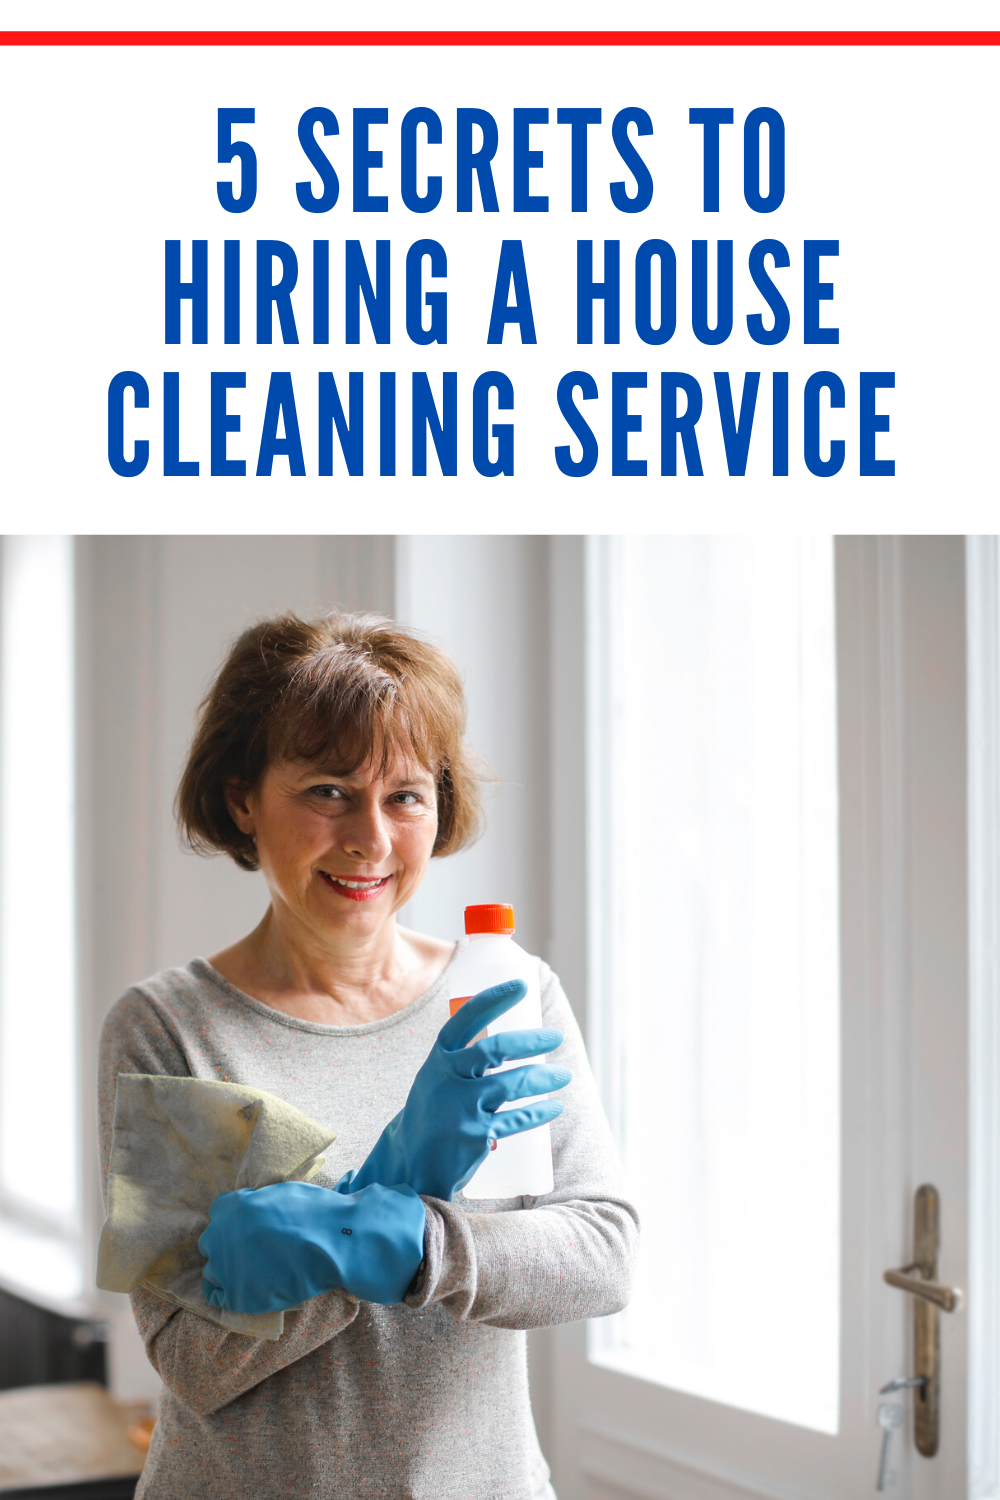 5 Secrets to Hiring a House Cleaning Service